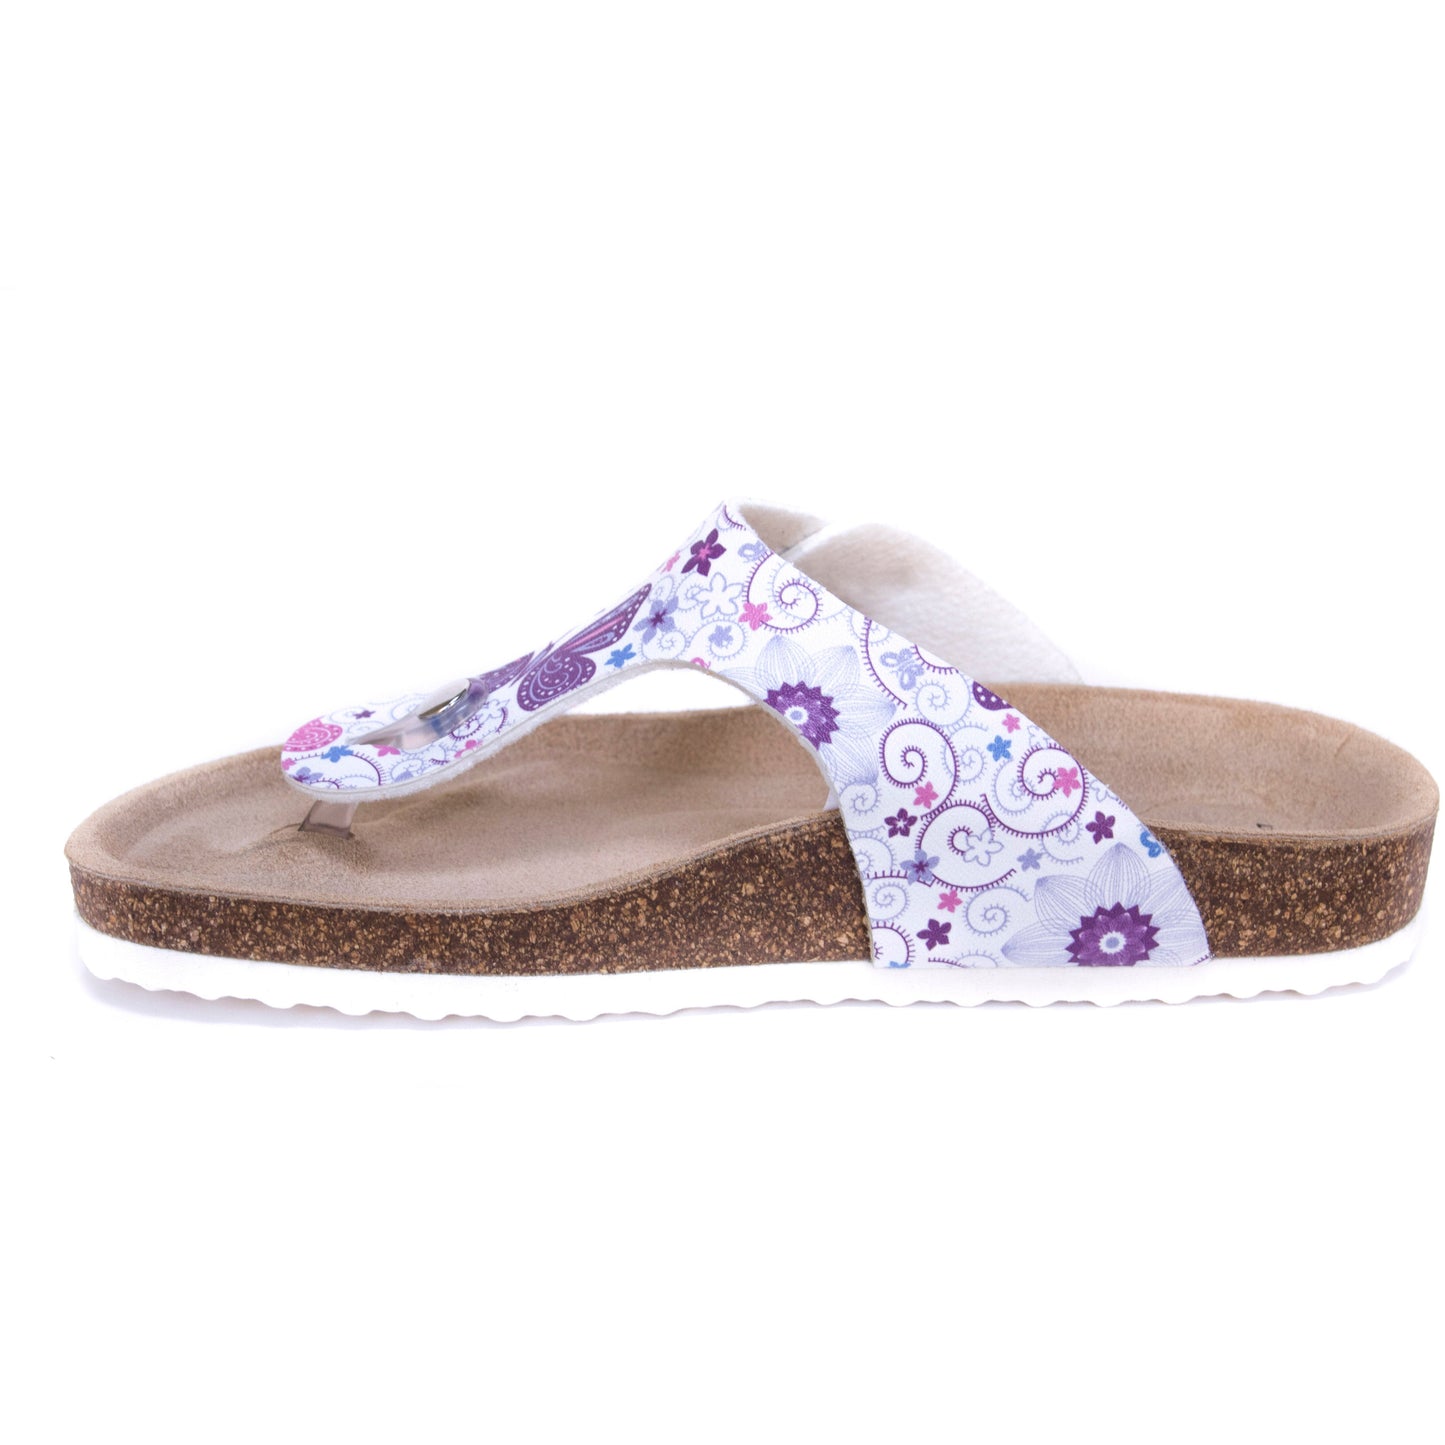 T96: colour 12 - white purple ladies orthotic sandals - feelgoodshoes.ae